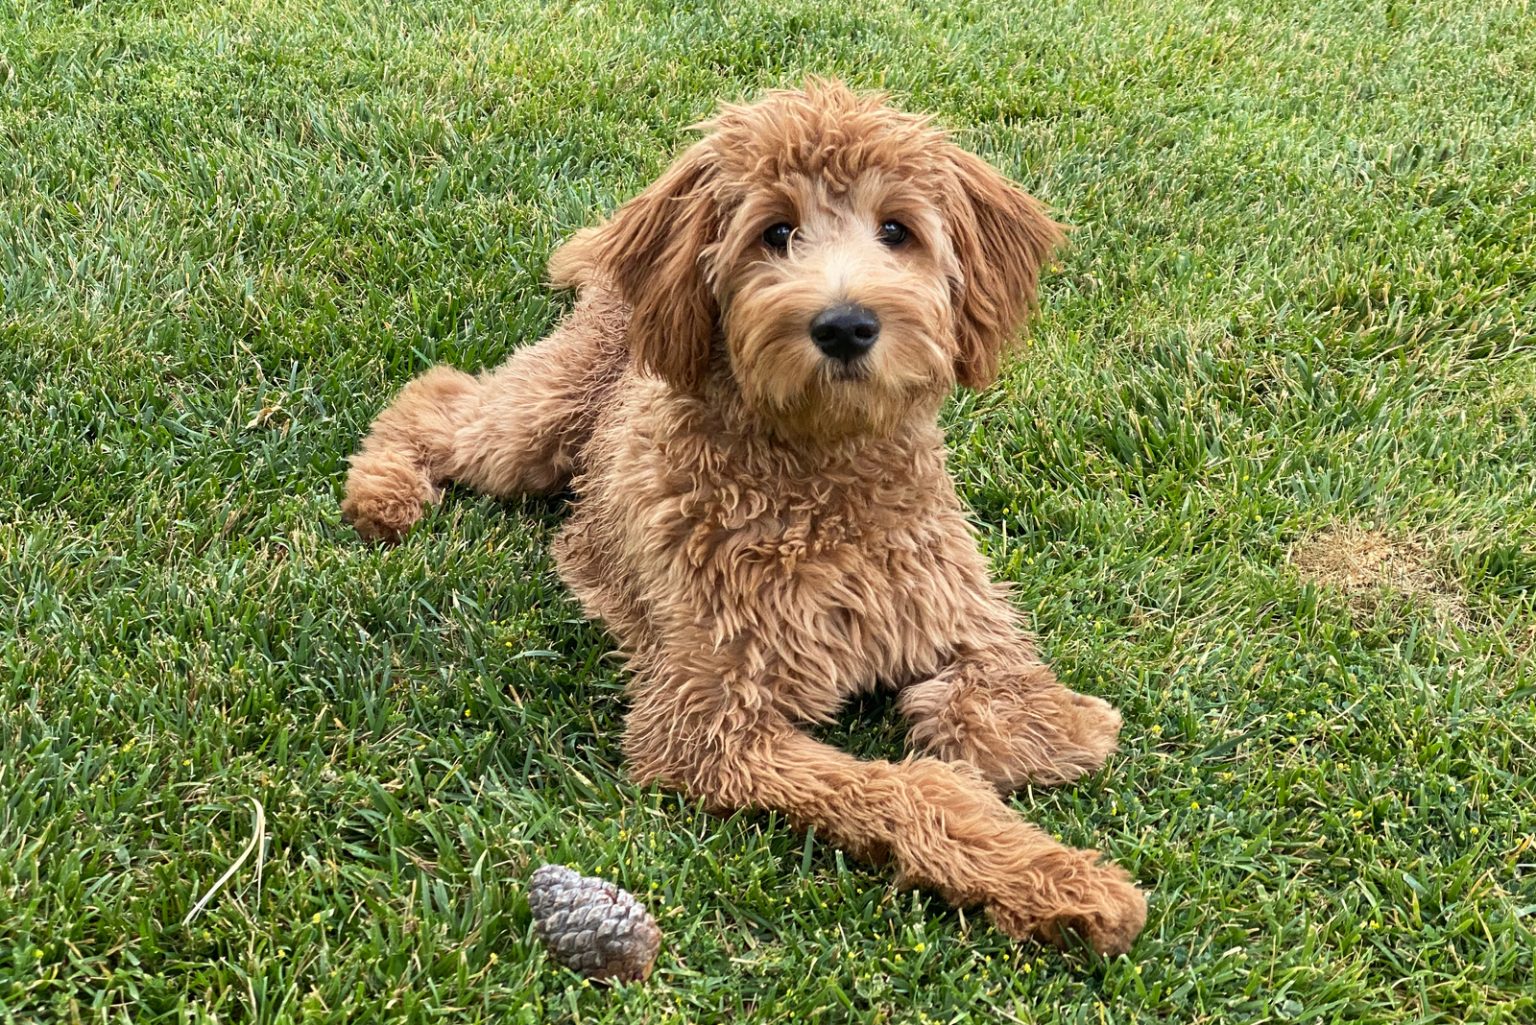 The Goldendoodle Lifespan How Long Do Goldendoodles Live?